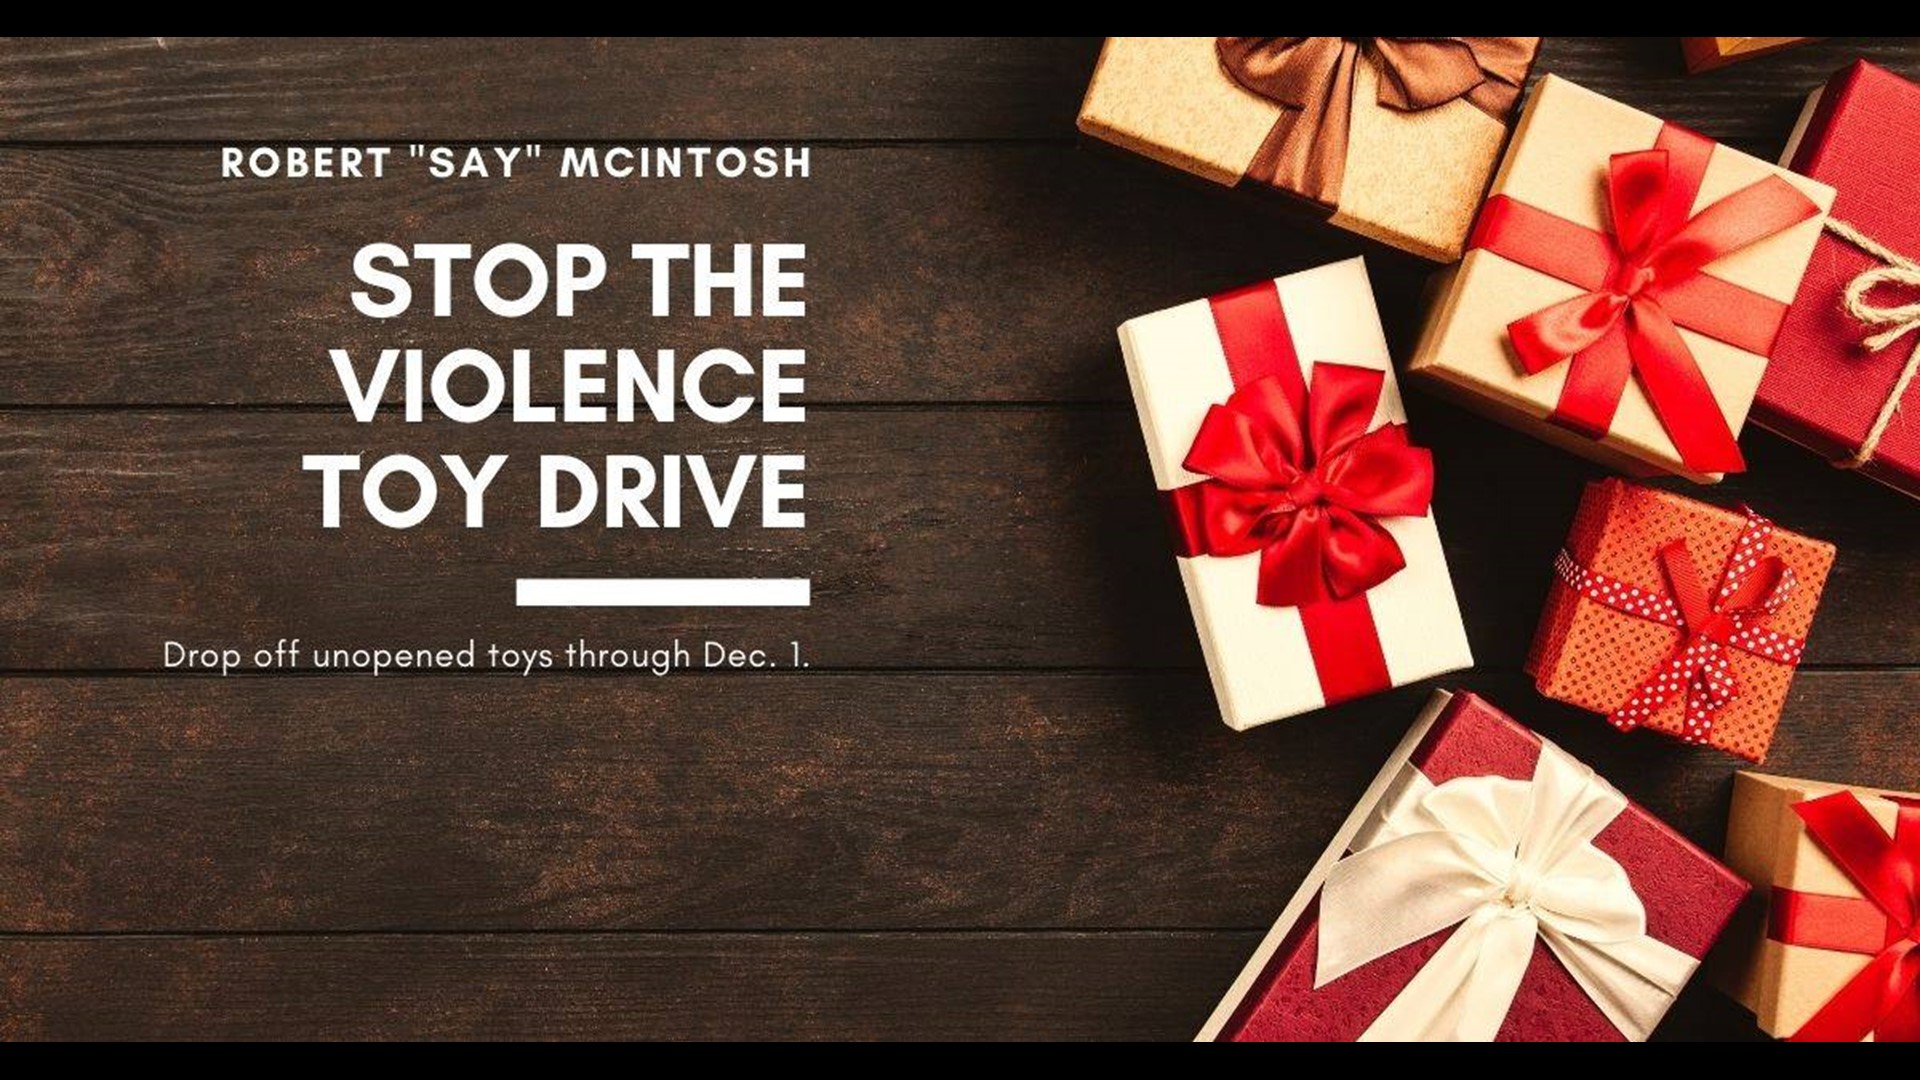 CALS is partnering with Mosaic Templars Cultural Center (MTCC) for their Robert “Say” McIntosh Stop the Violence Toy Drive. Donate new toys now through Dec. 1.